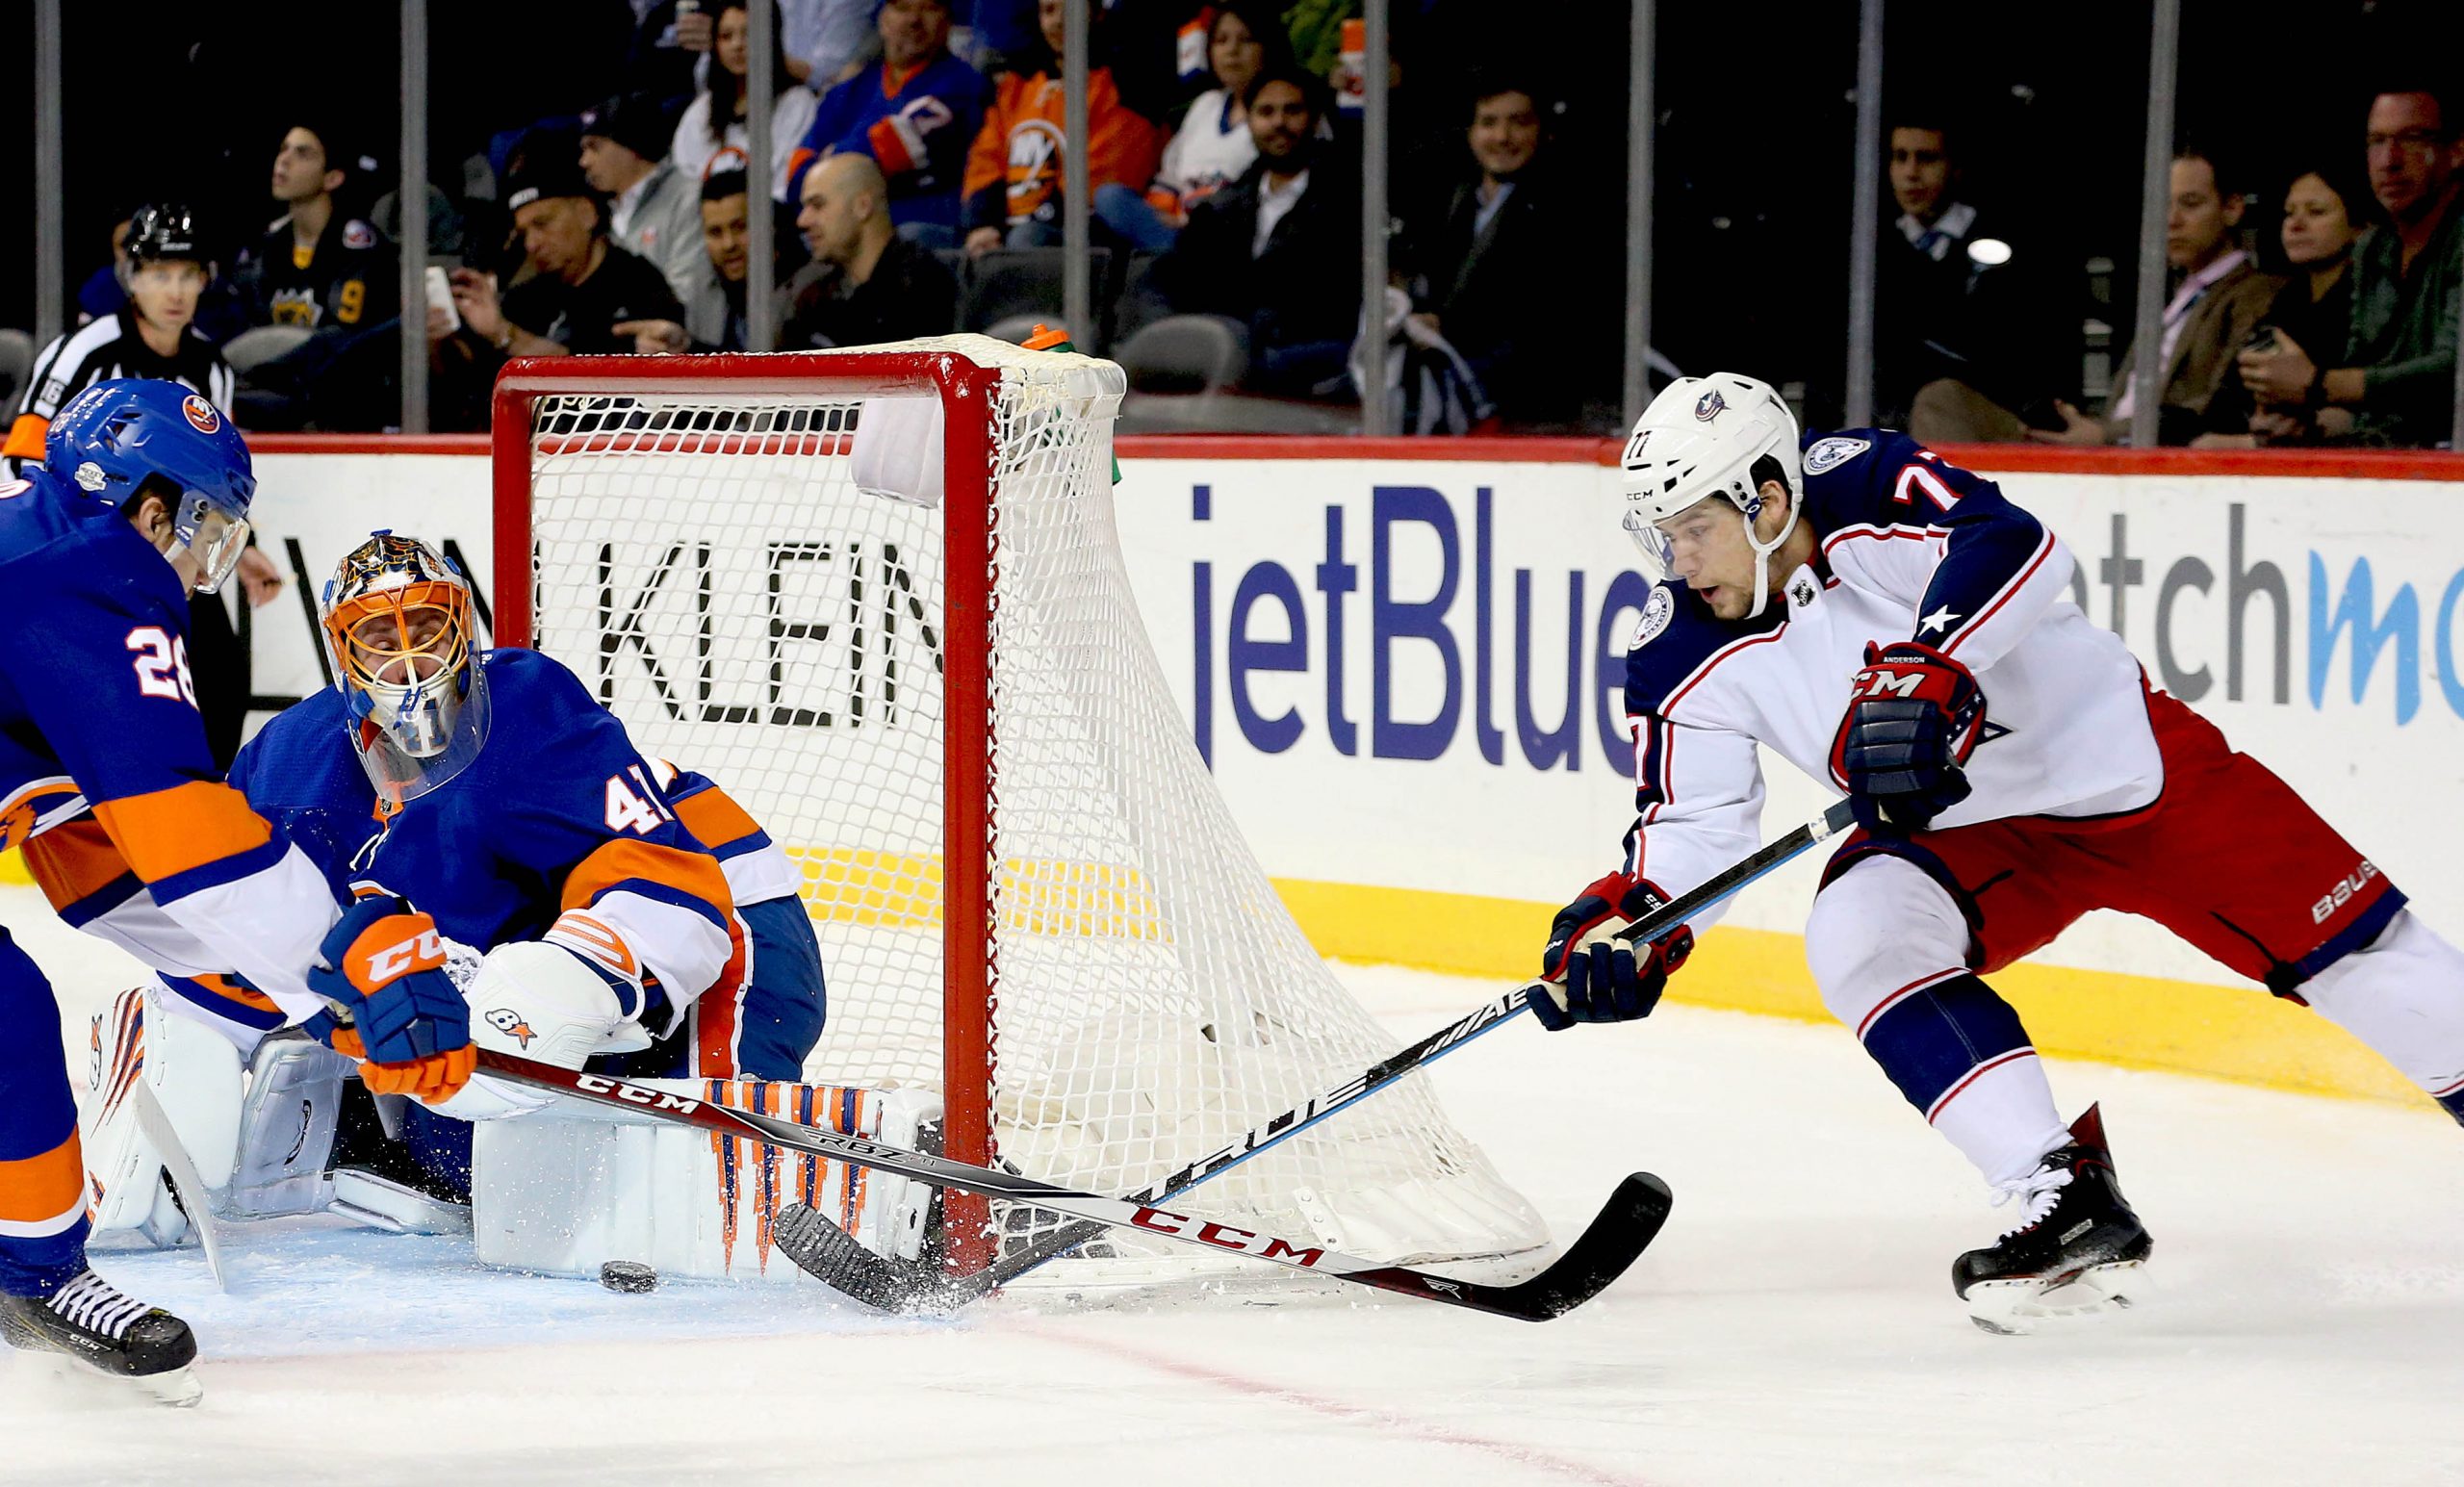 Feb 13, 2018; Brooklyn, NY, USA; New York Islanders goaltender Jaroslav Halak (41) makes a save on a wrap around shot by Columbus Blue Jackets right wing Josh Anderson (77) during the first period at Barclays Center. Mandatory Credit: Andy Marlin-USA TODAY Sports